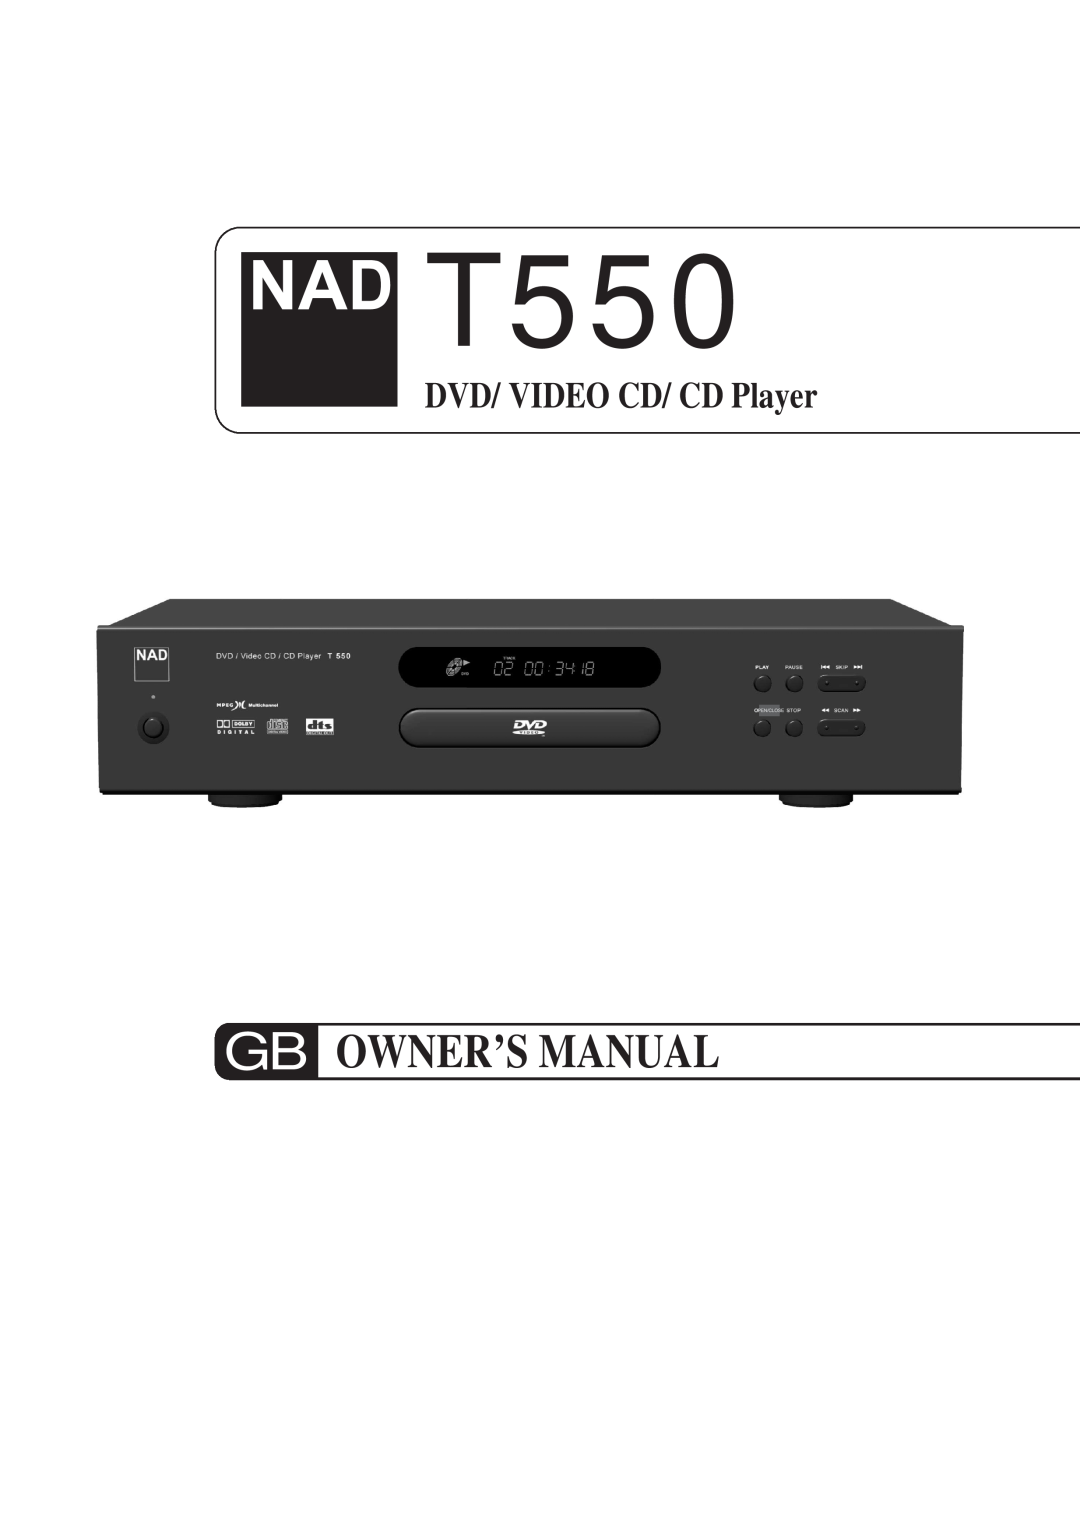 NAD T550DVD owner manual E S P, Gb Owner’S Manual, DVD/ VIDEO CD/ CD Player 